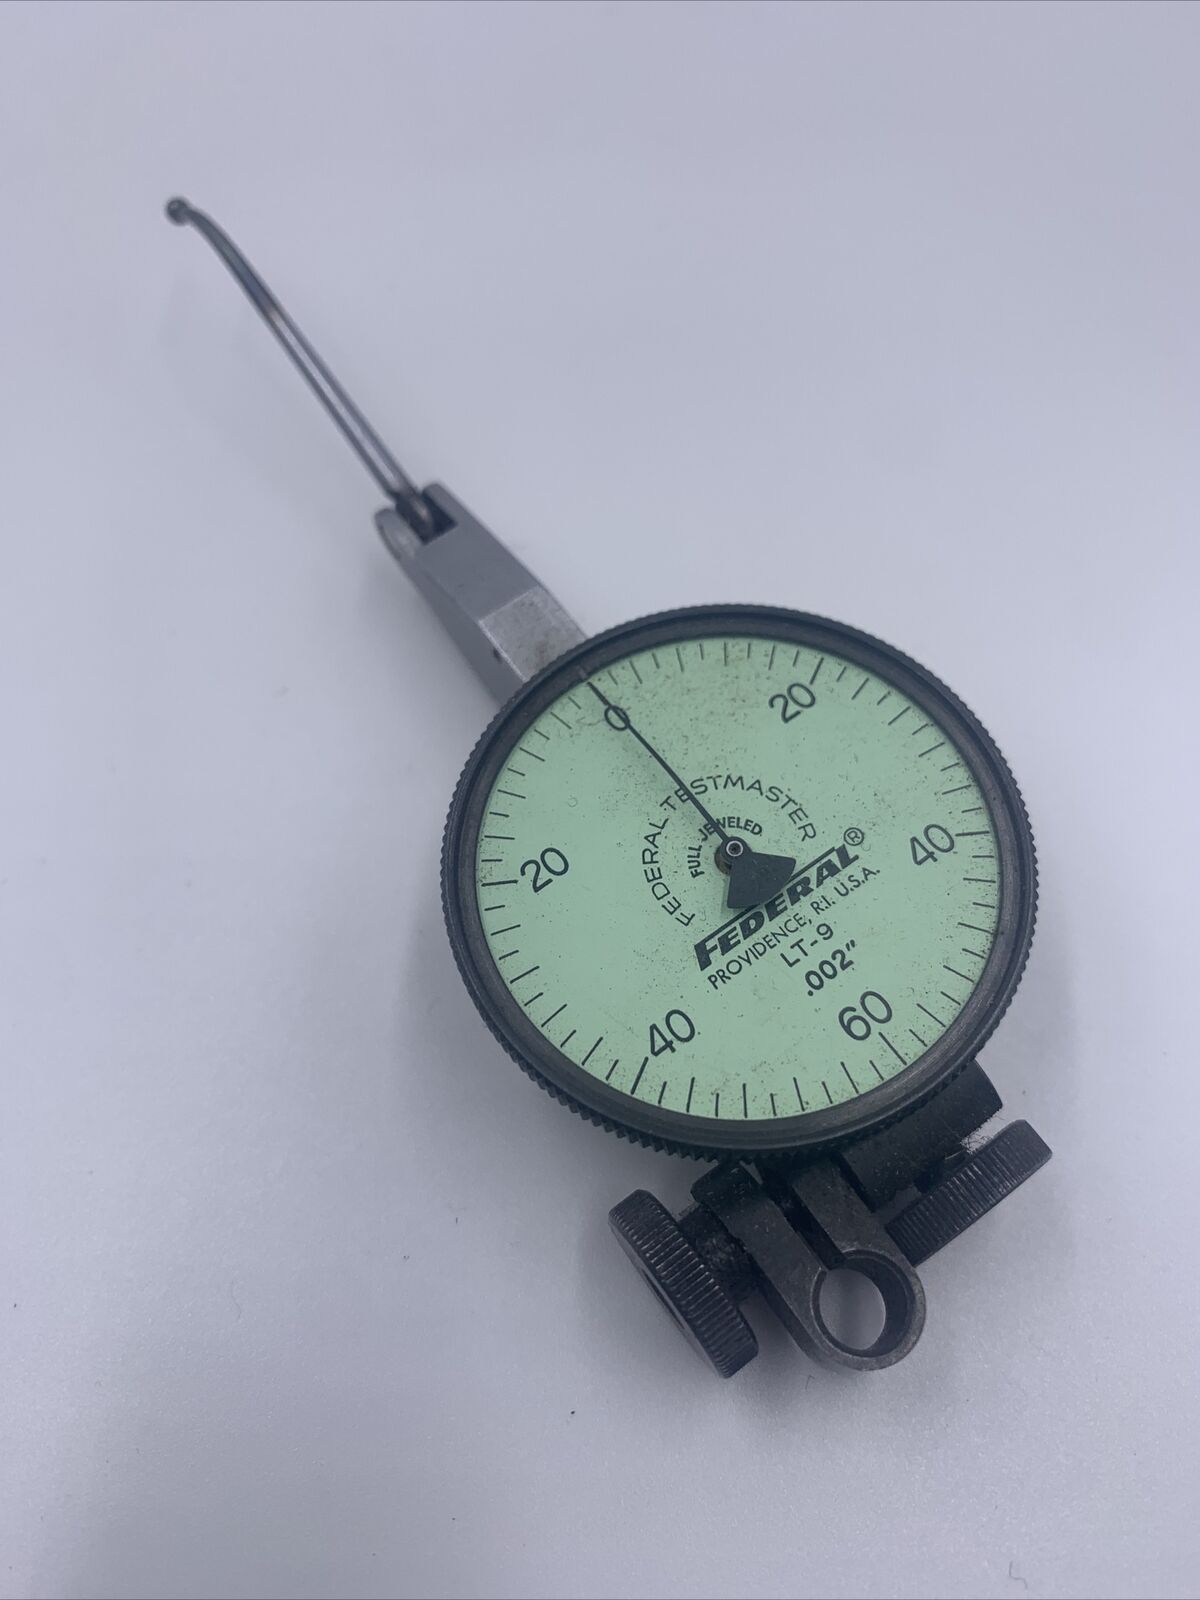 #6 Federal Testmaster Dial Indicator Lt-9 .002